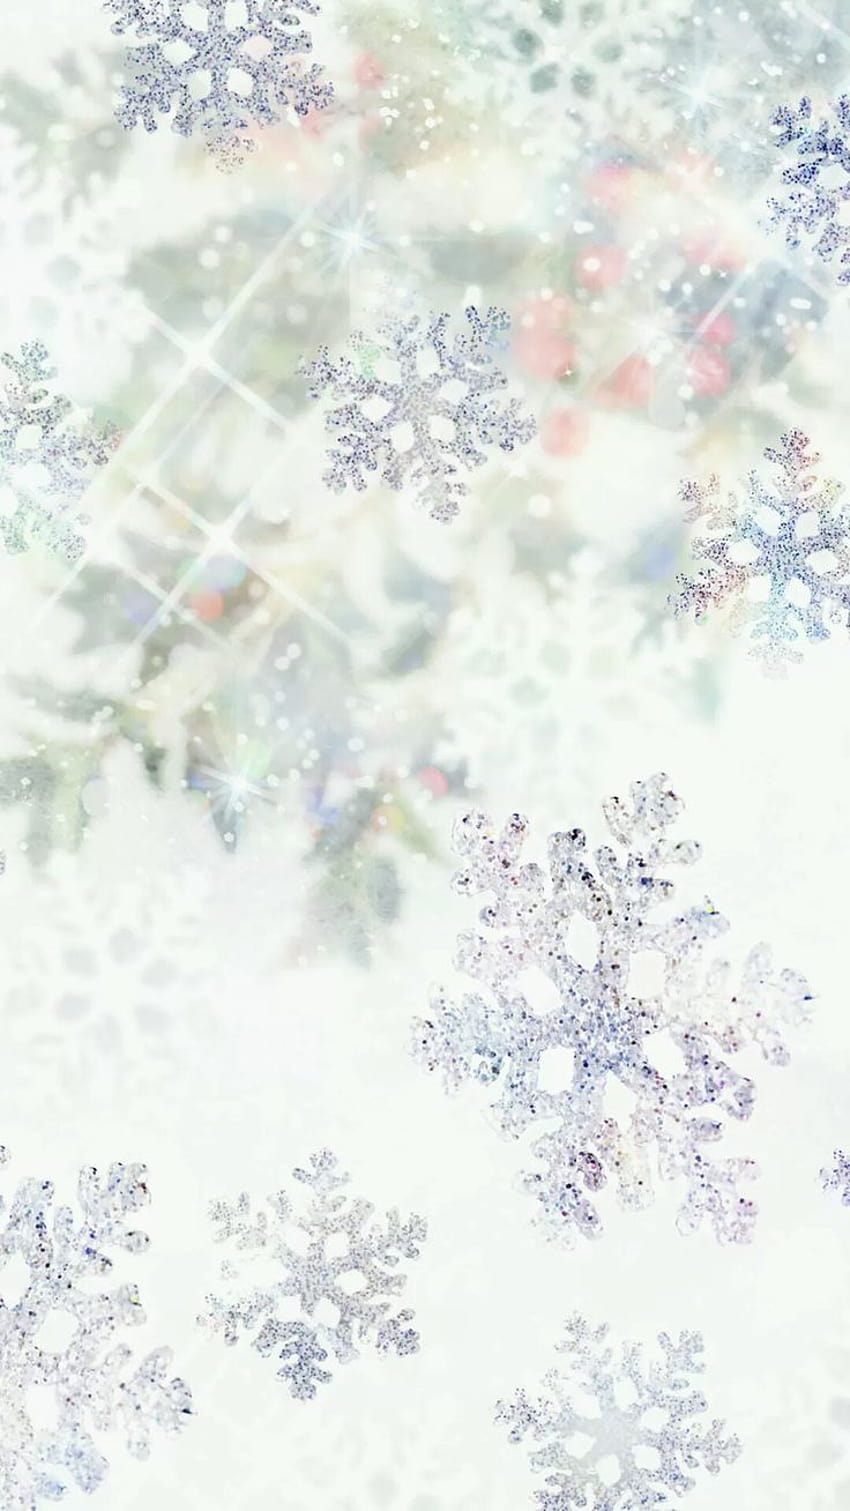 Sparkling snowflakes 1080 x 1920 available for ., sparkling winter HD phone wallpaper